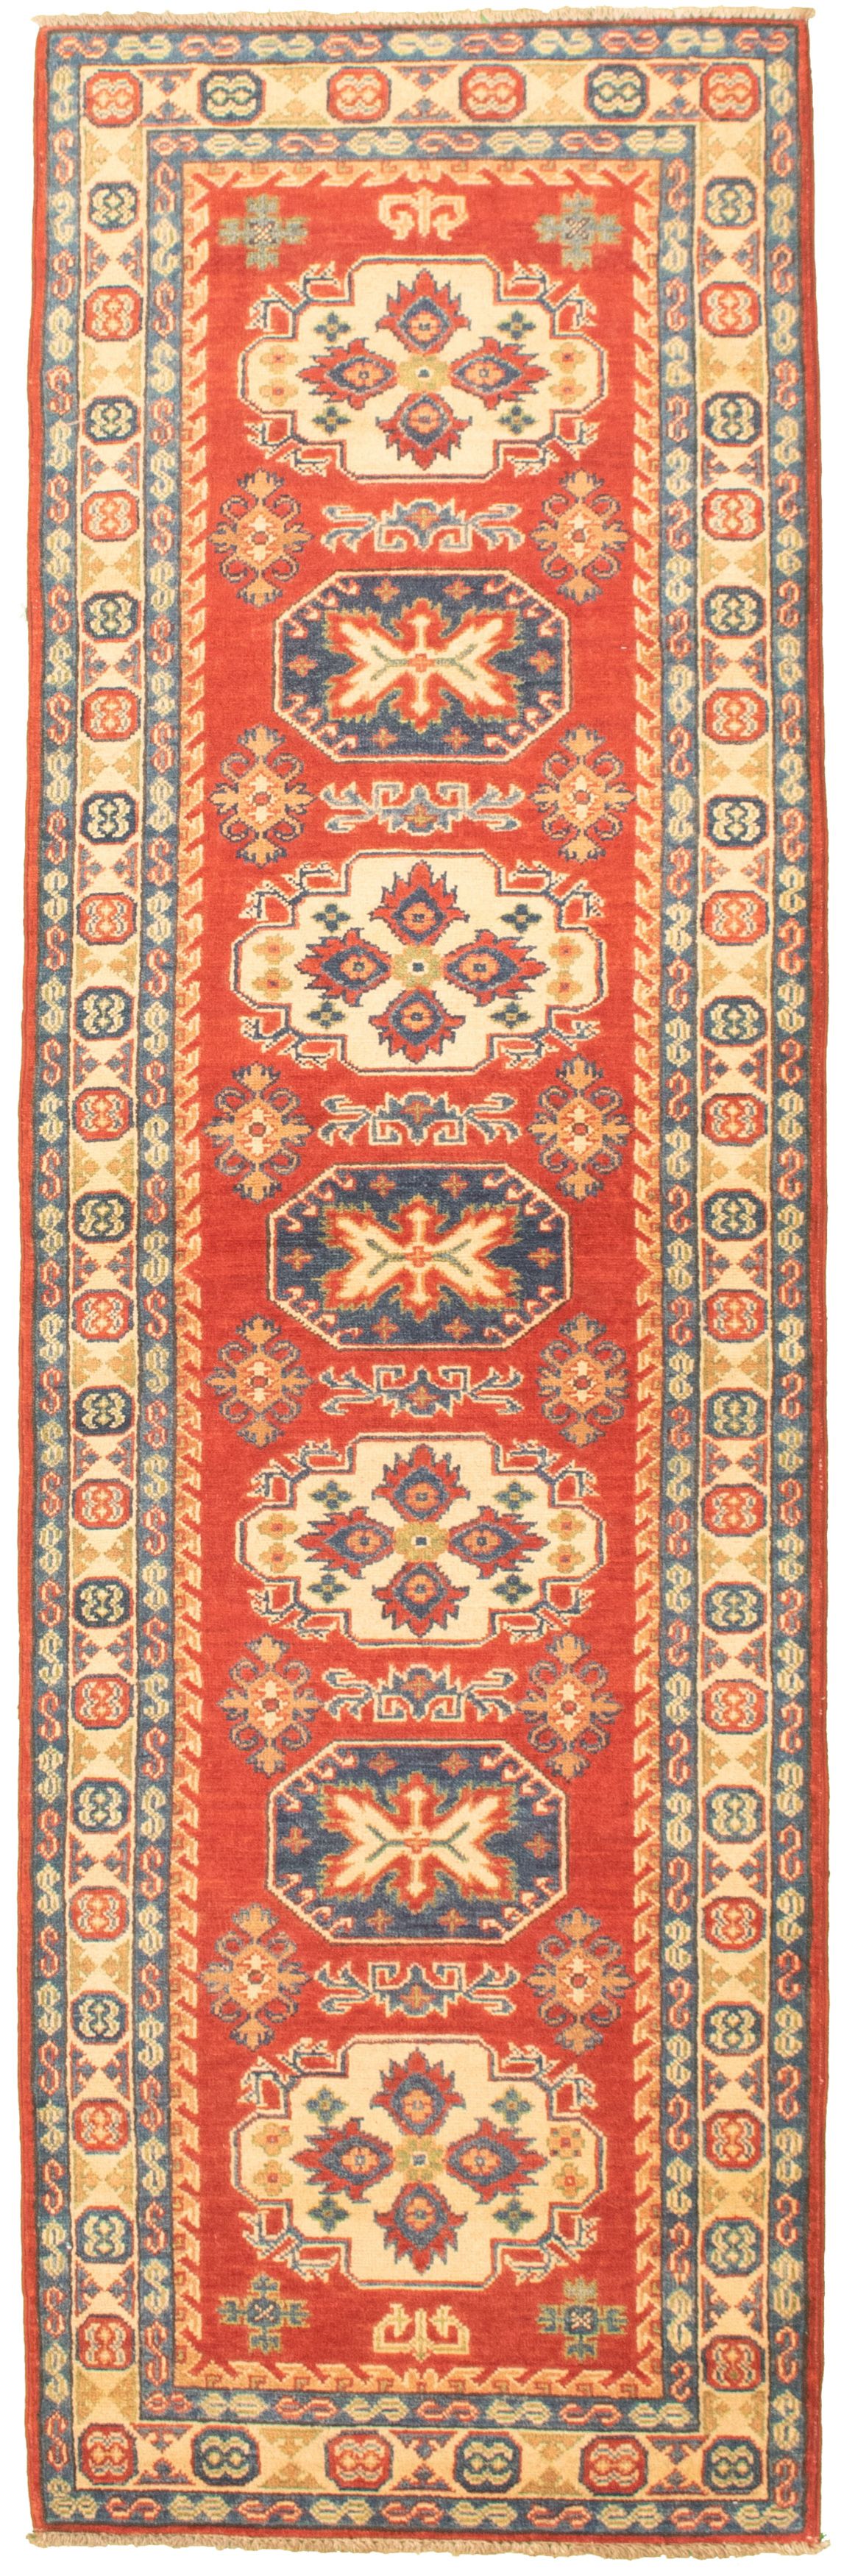 Hand-knotted Finest Gazni Red Wool Rug 2'7" x 9'5" Size: 2'7" x 9'5"  